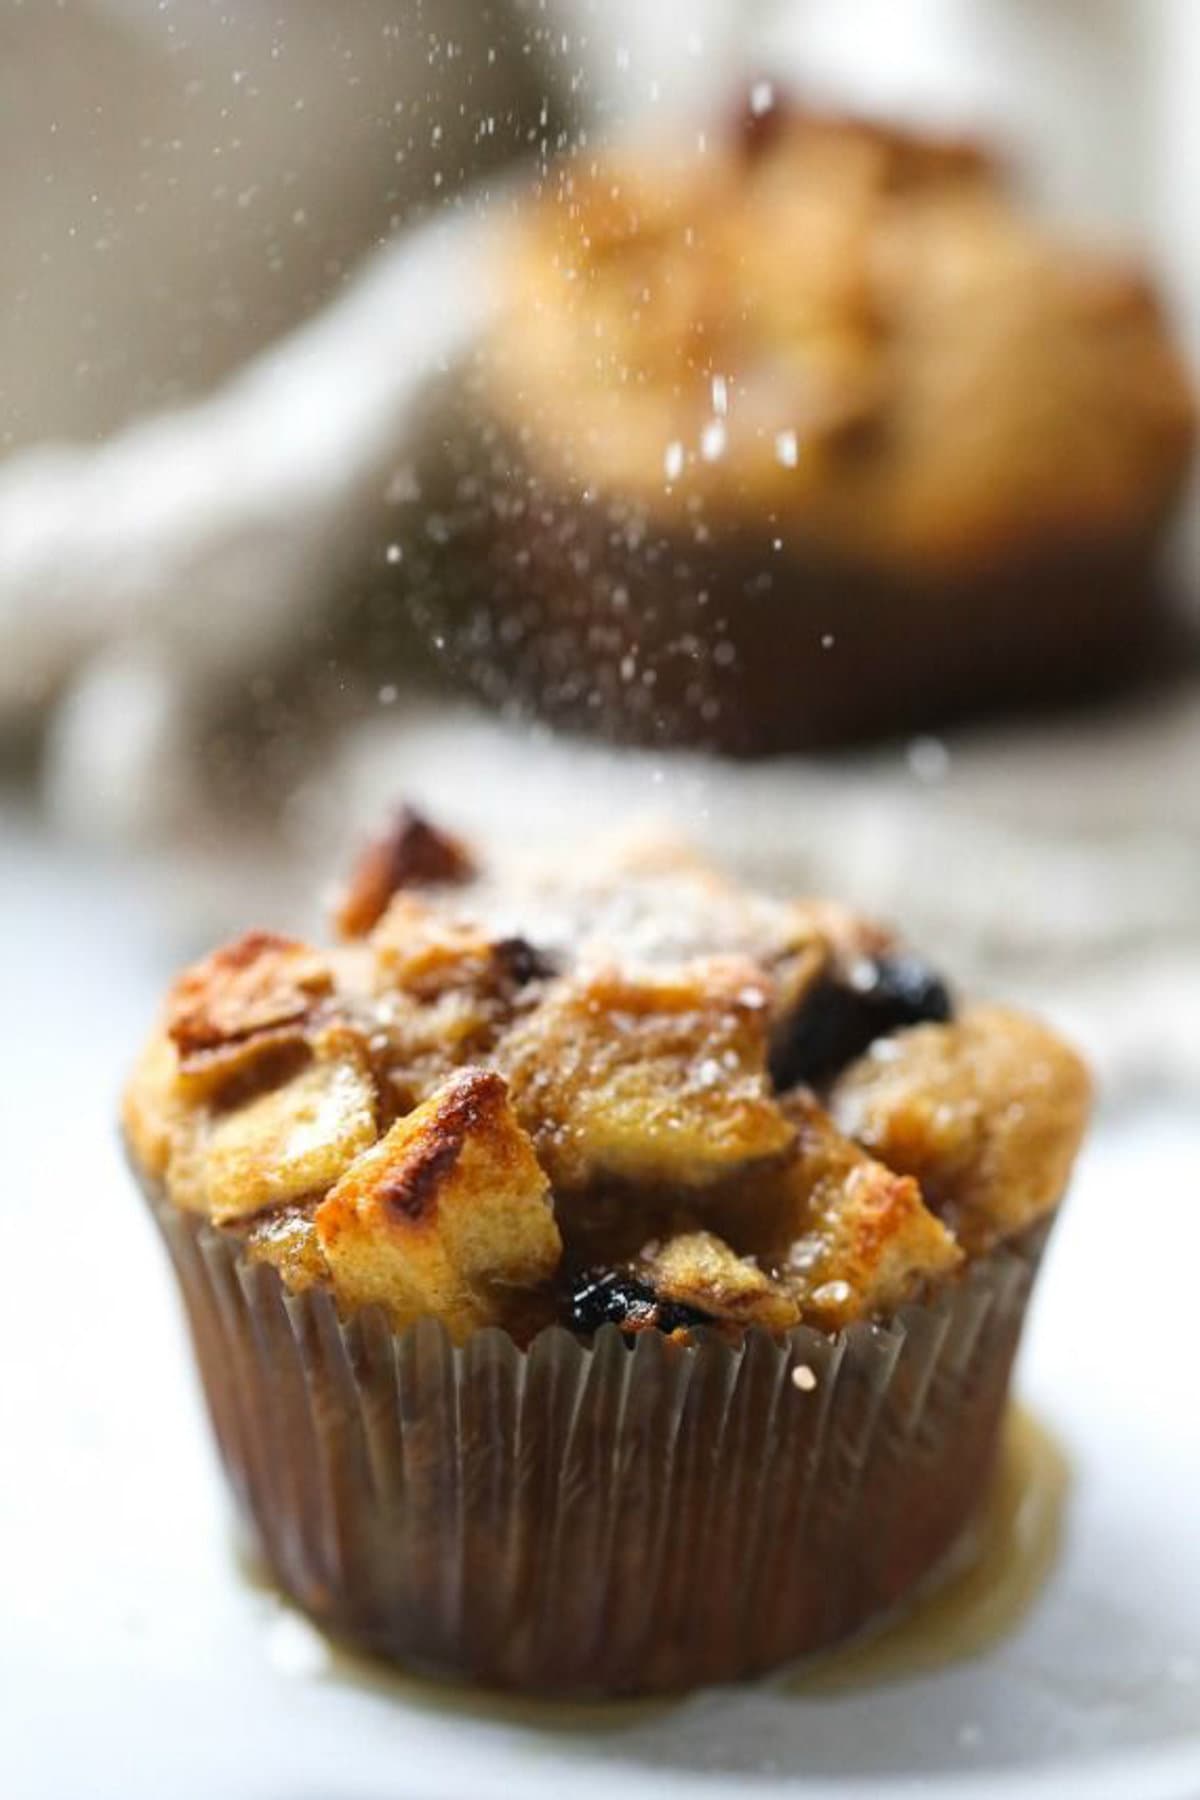 Topping finished french toast muffin with sugar as a garnish